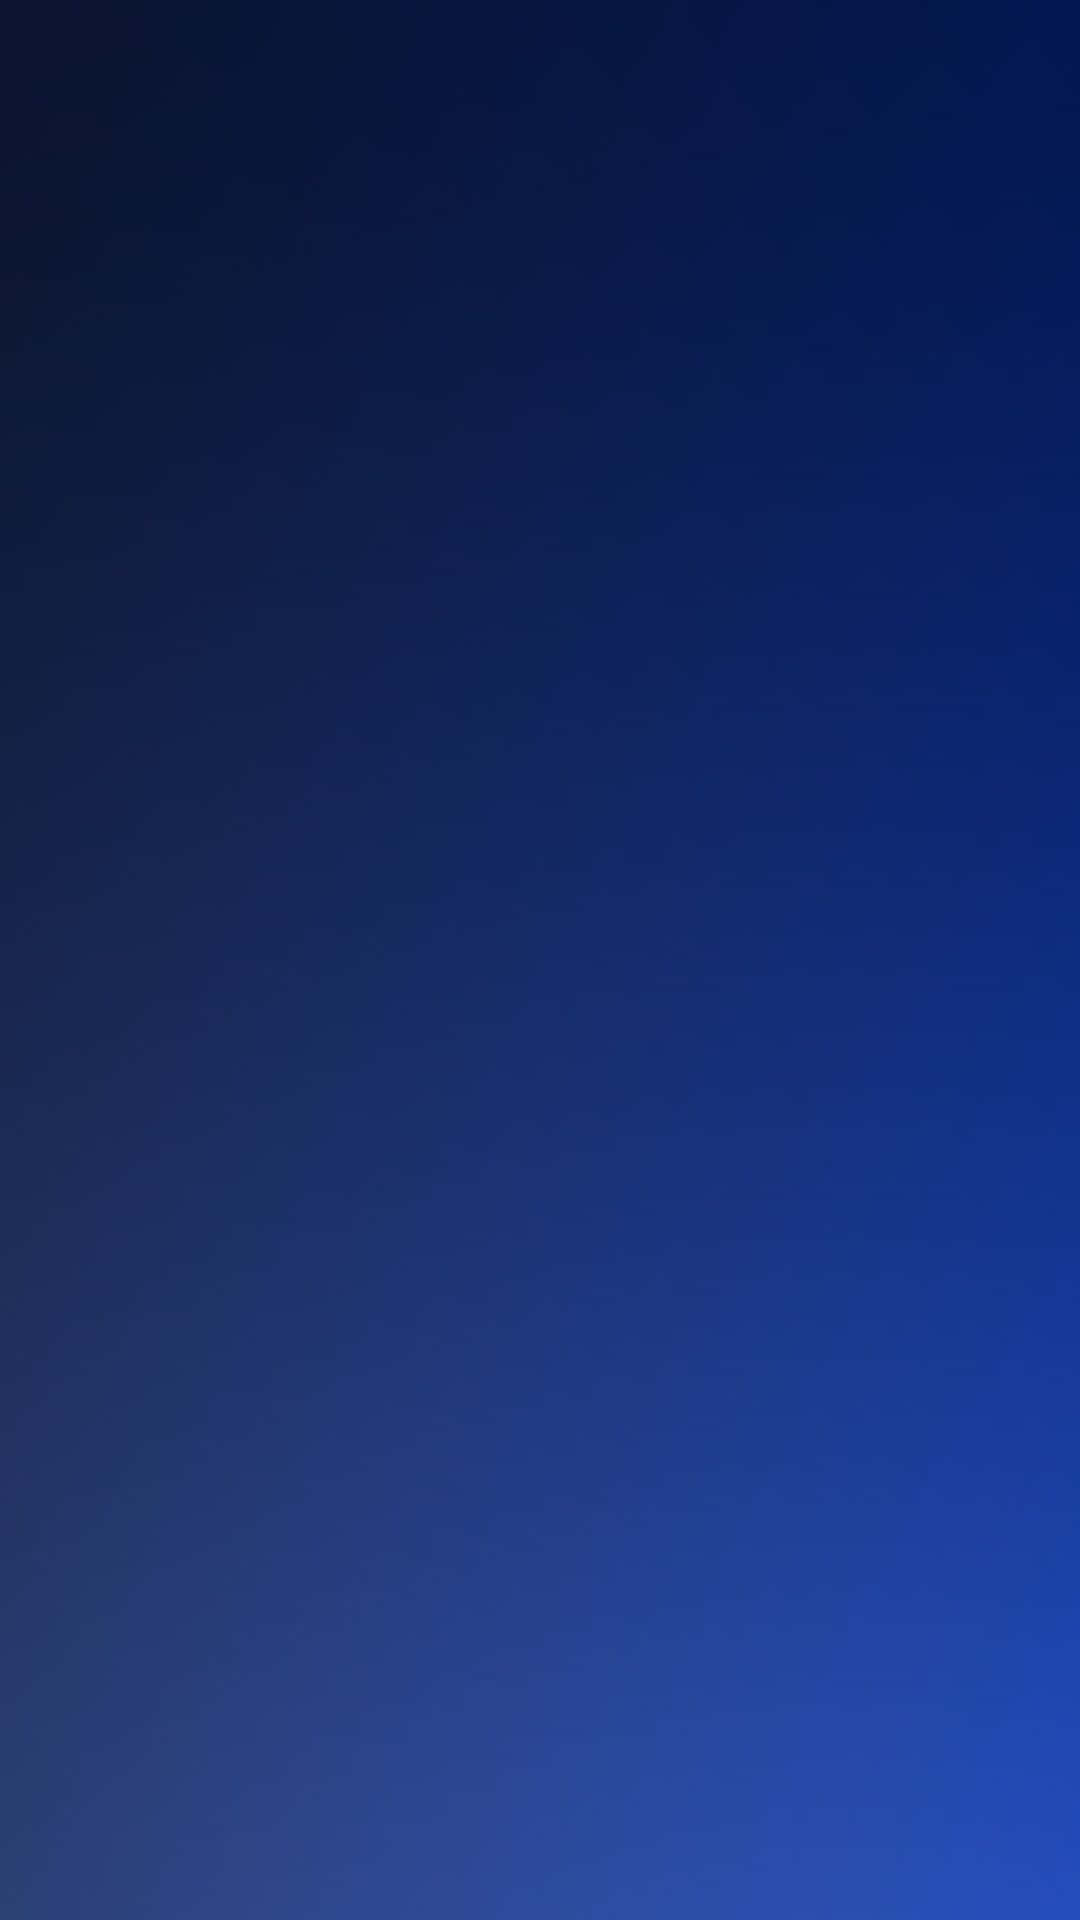 Take A Look At Blue Phone's Latest Smartphone Background